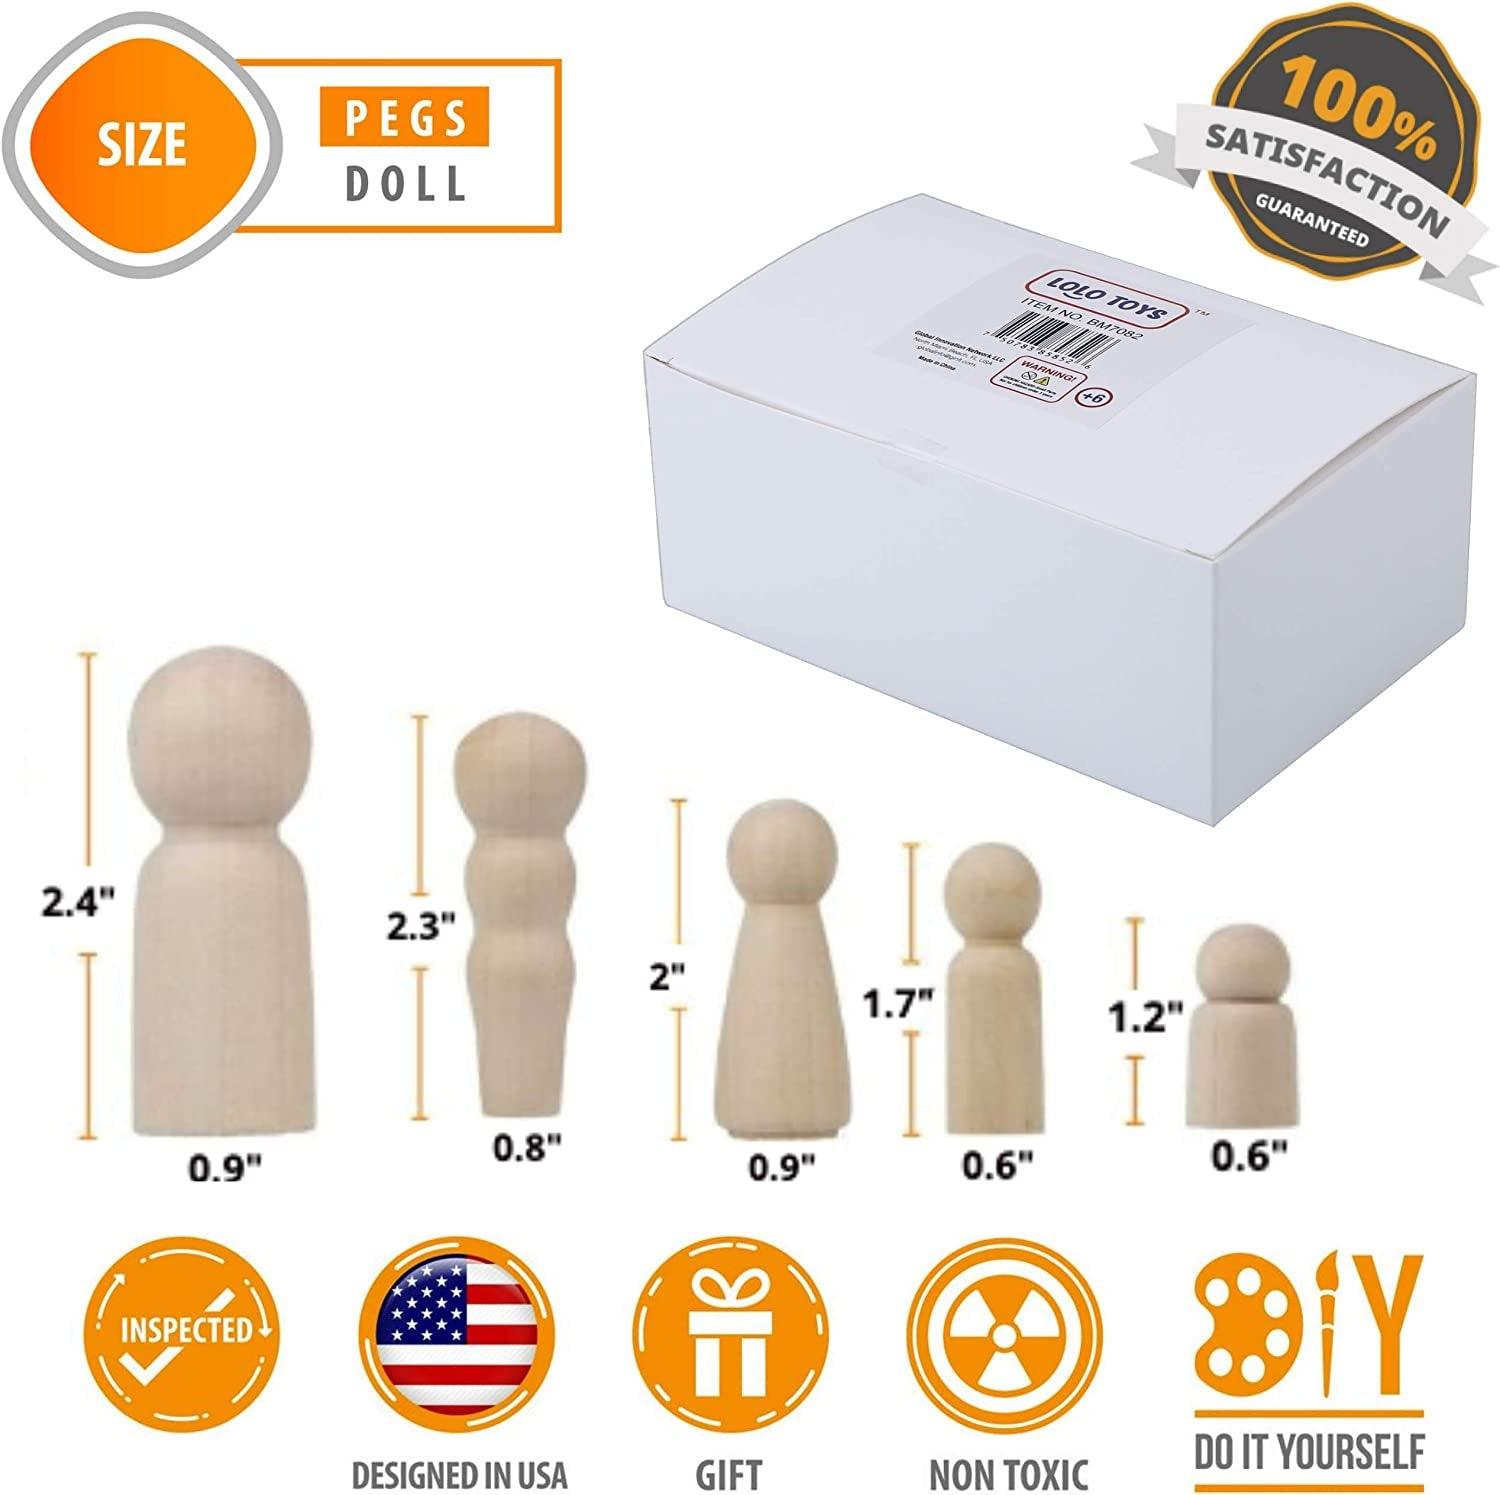 Wooden Peg Dolls Unfinished People – Pack of 40 with Storage Case in Assorted Sizes Natural Wood Shapes Figures - WoodArtSupply